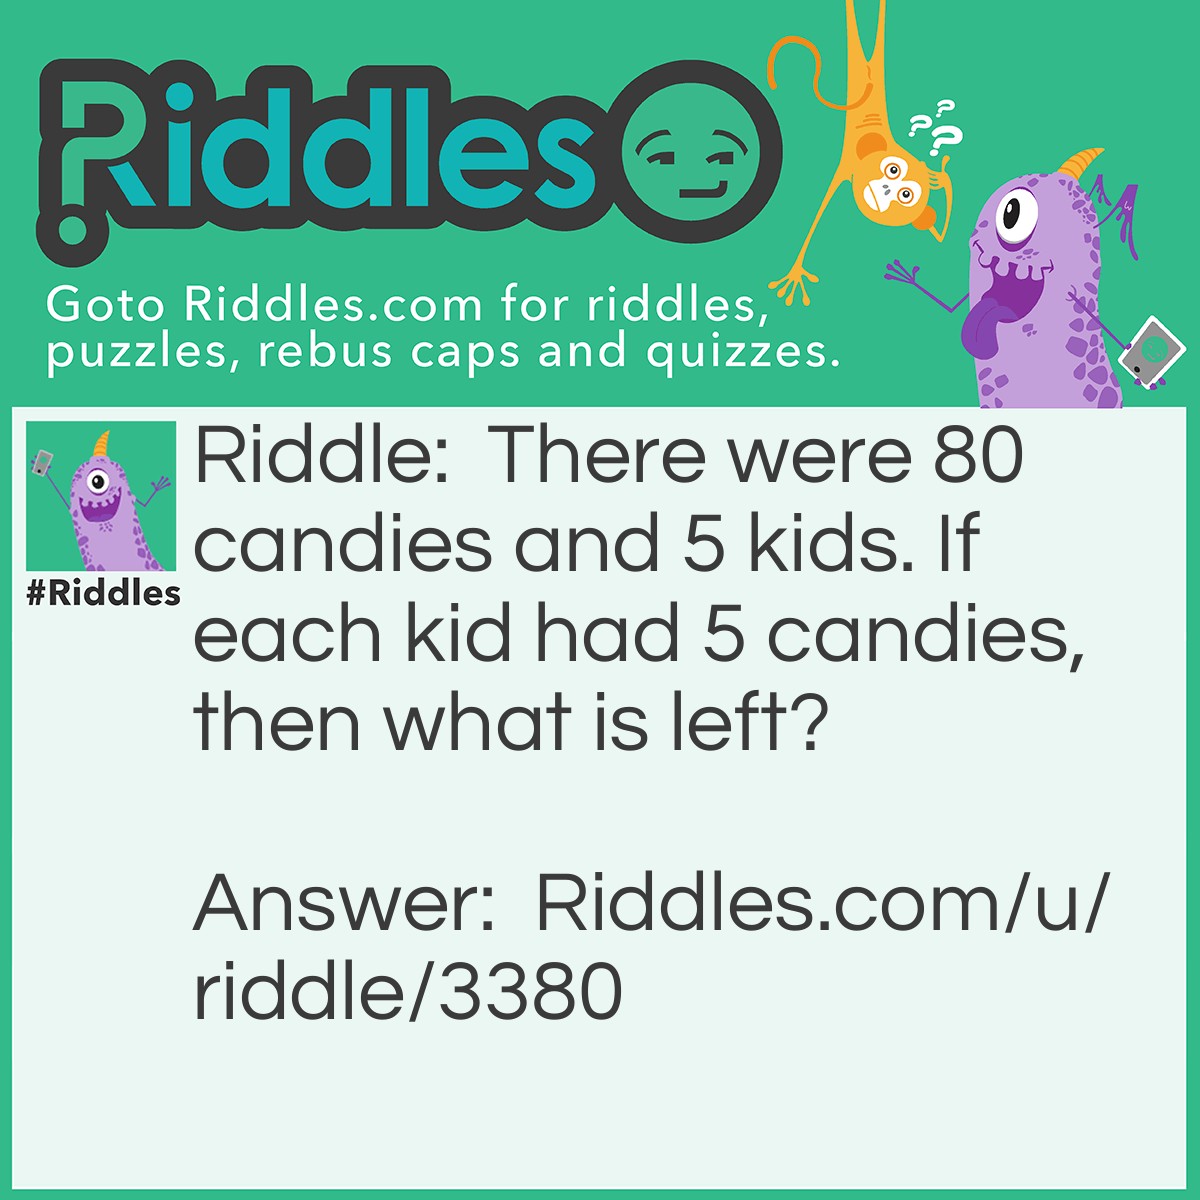 Riddle: There were 80 candies and 5 kids. If each kid had 5 candies, then what is left? Answer: West. <-----